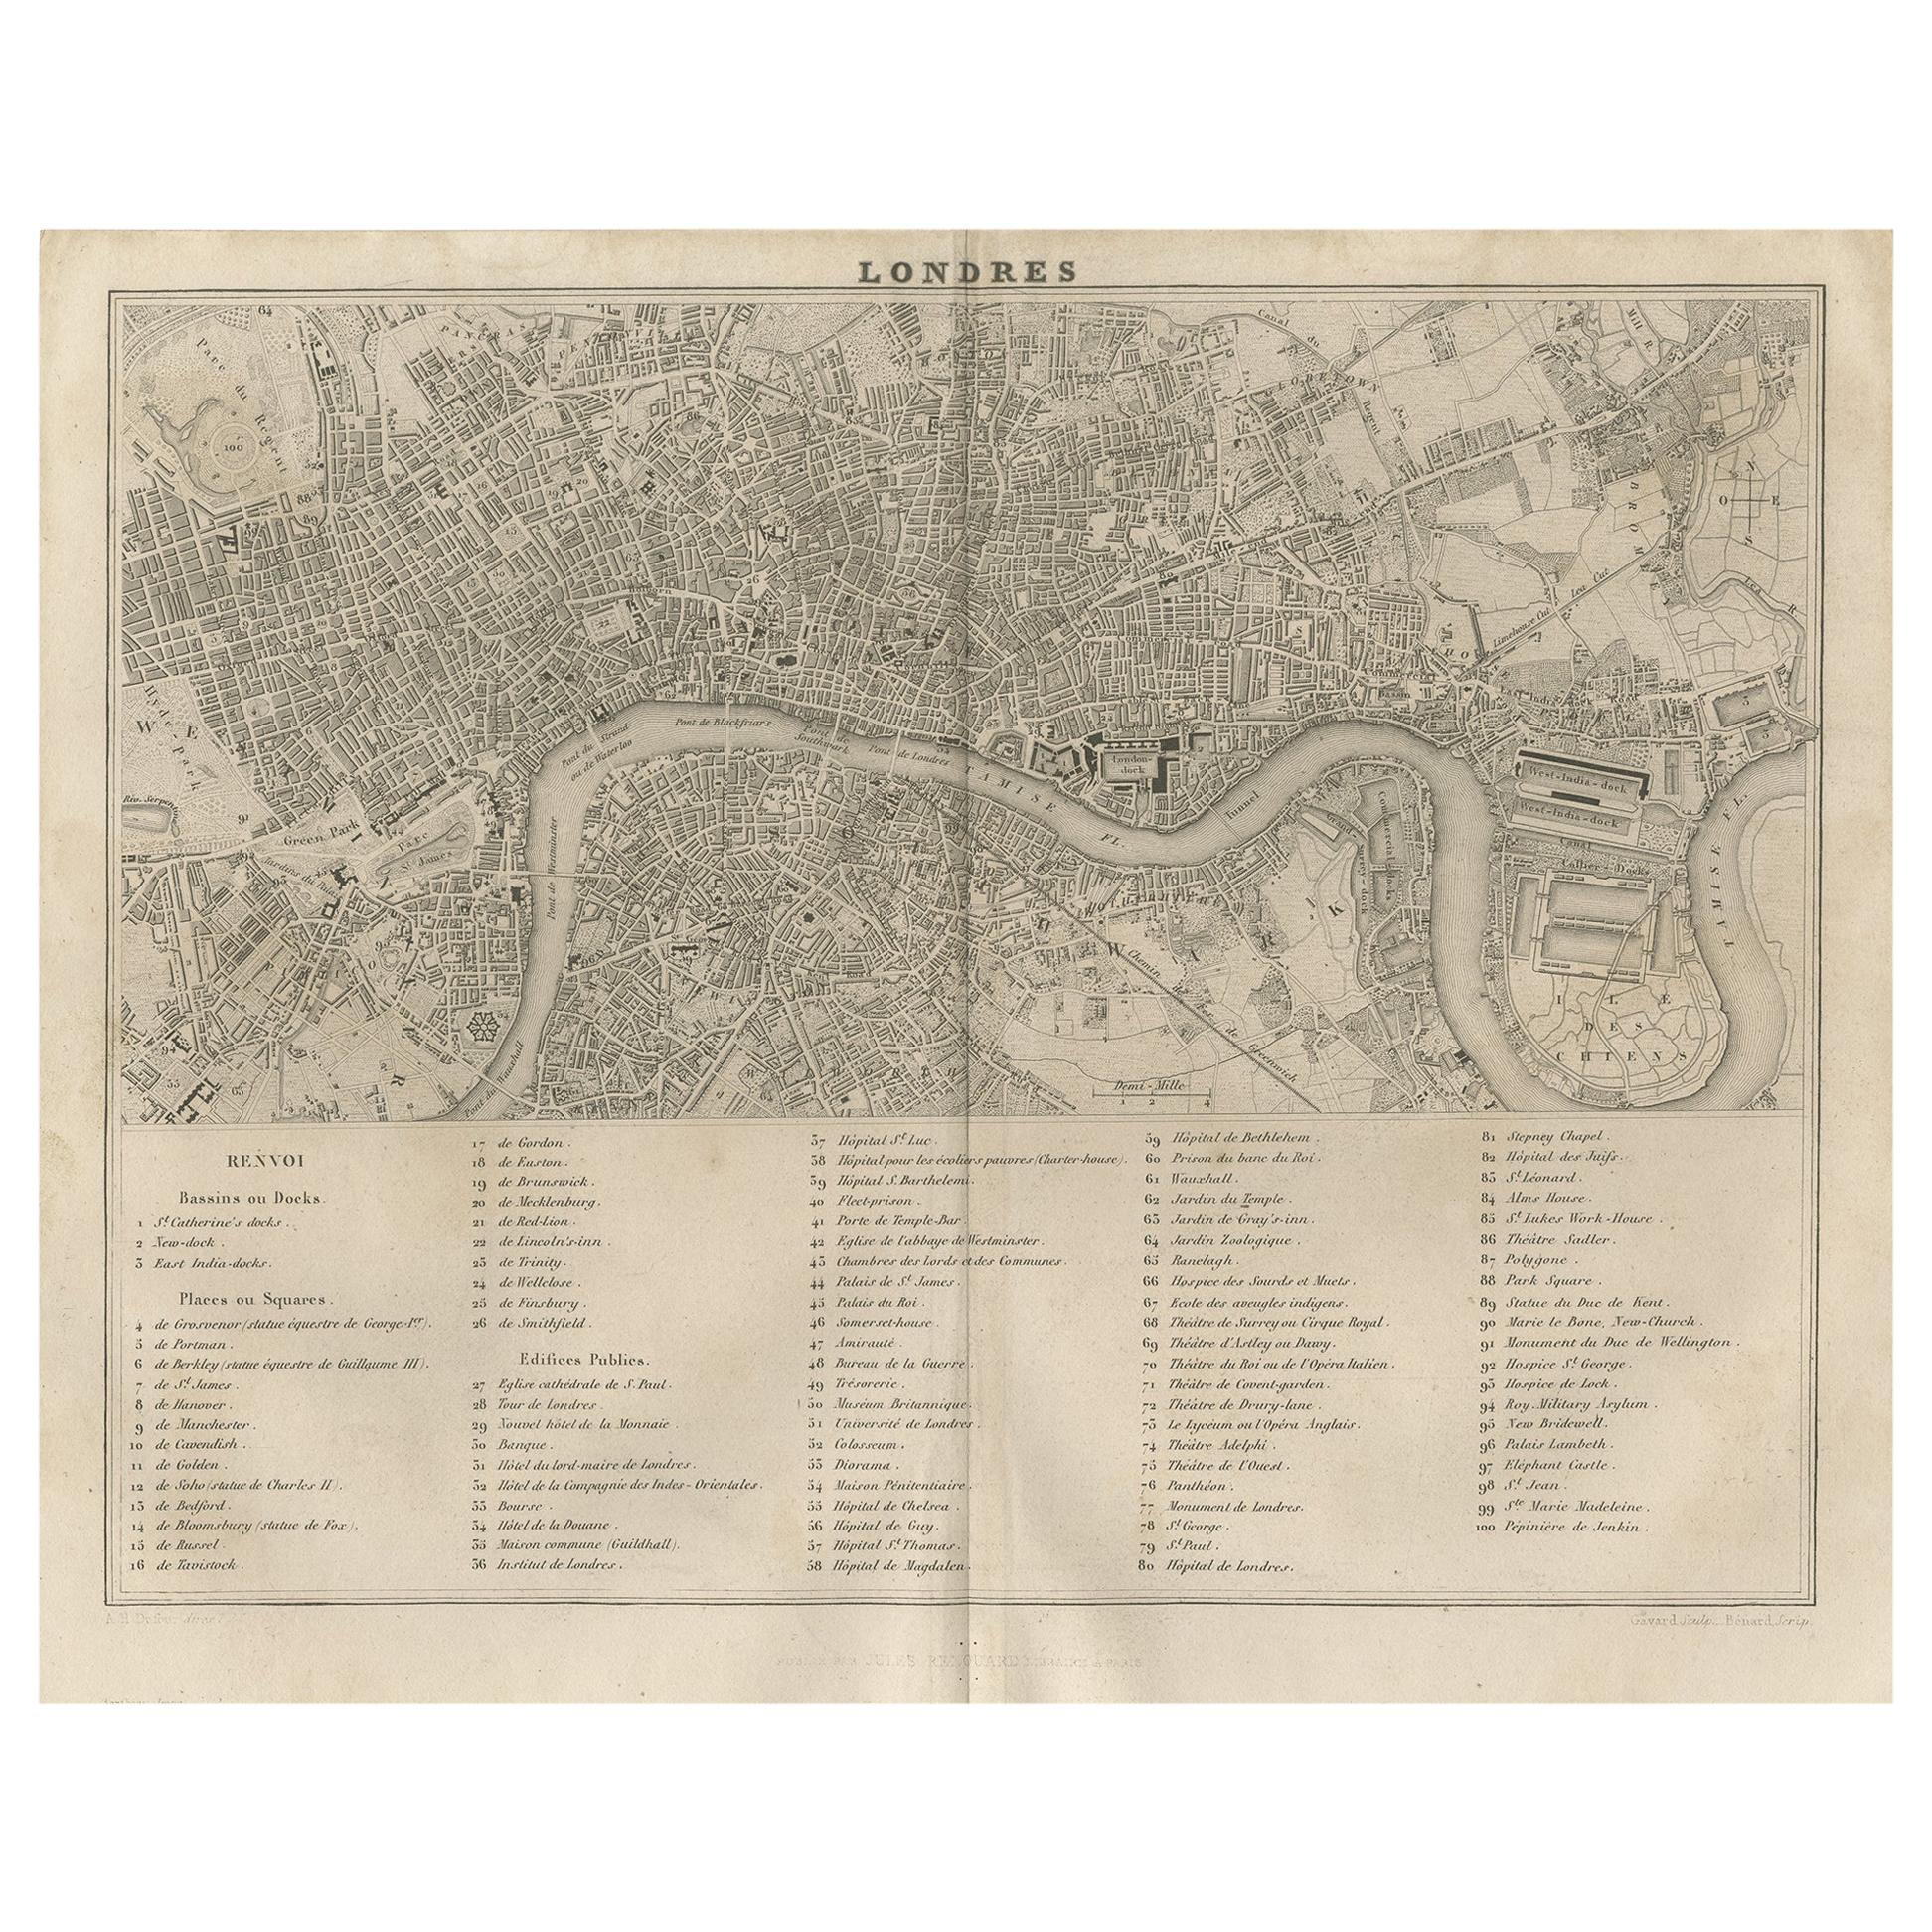 Antique Map of the City of London by Balbi '1847' For Sale